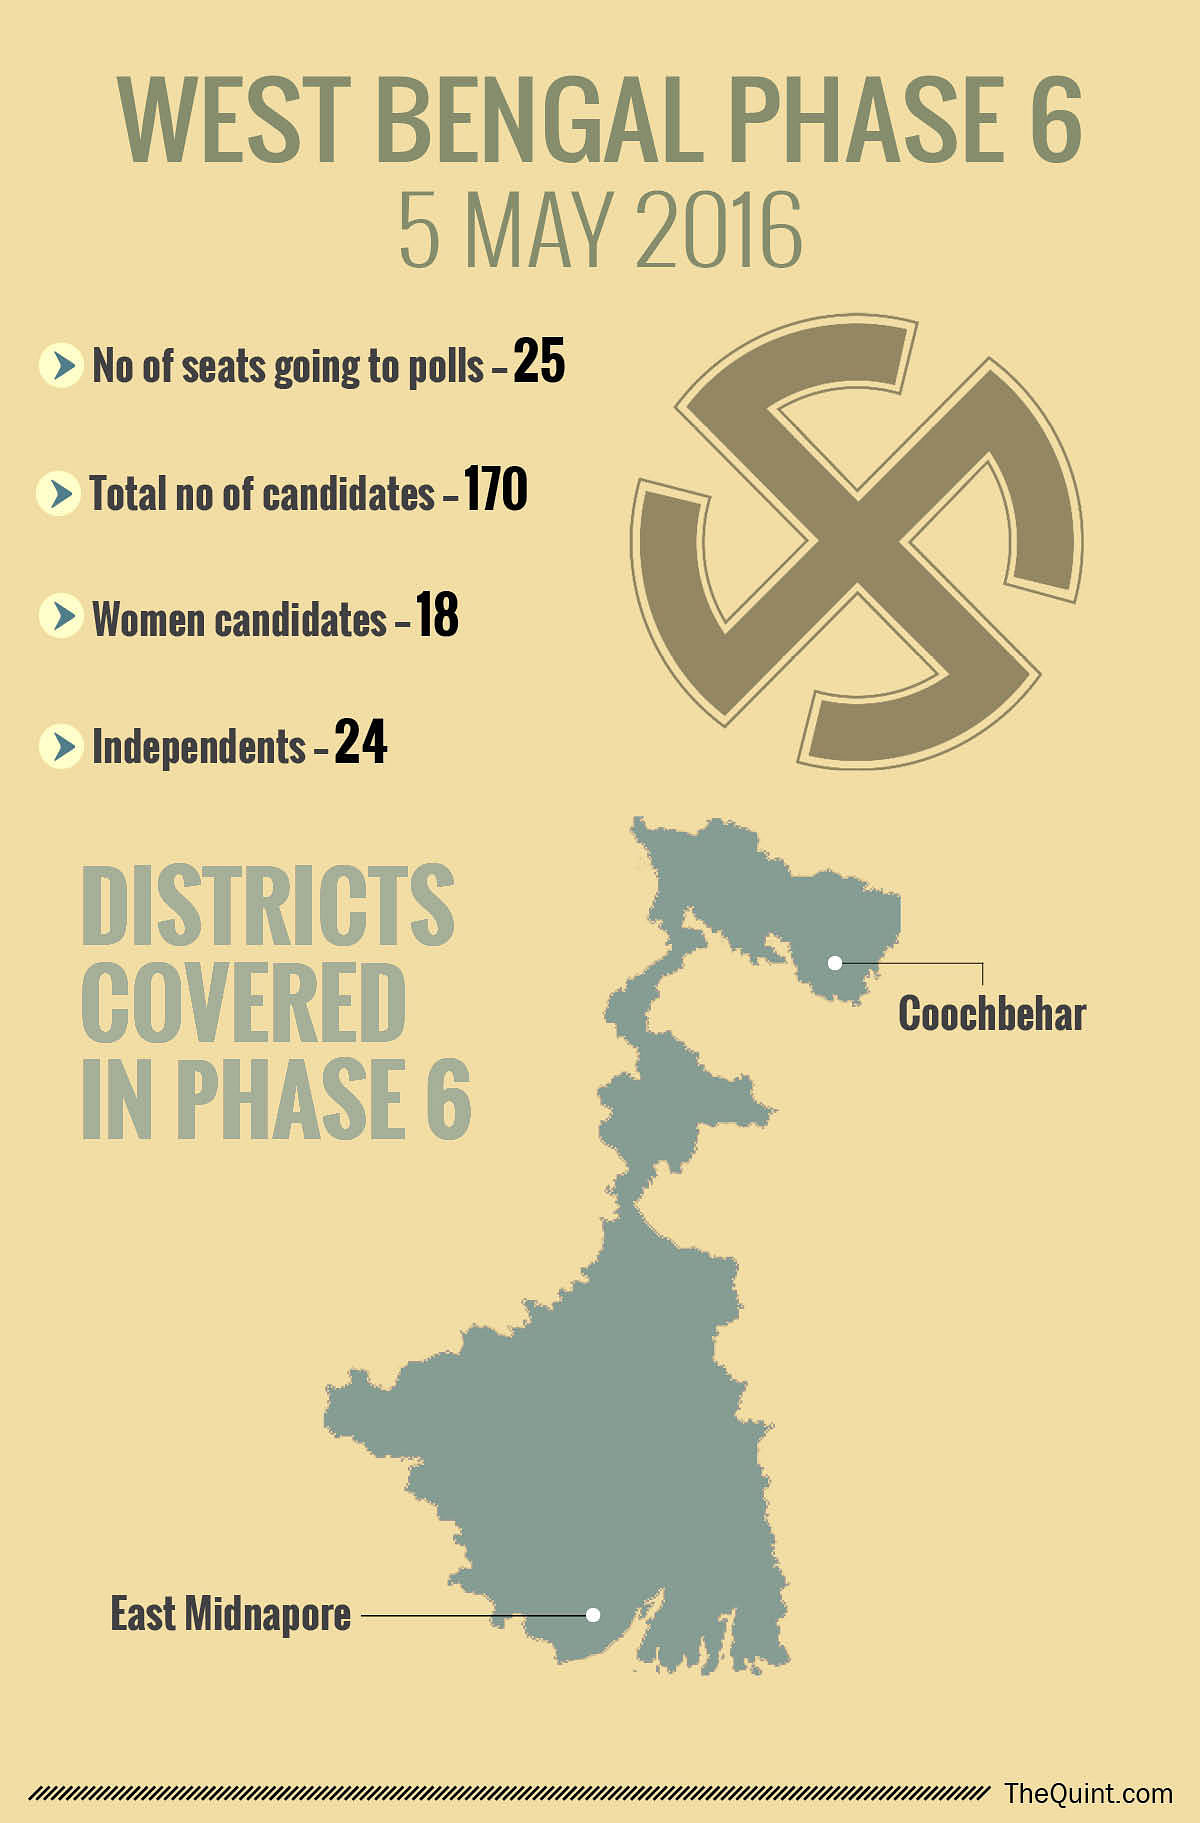 West Bengal enters the sixth and last phase of Assembly elections.